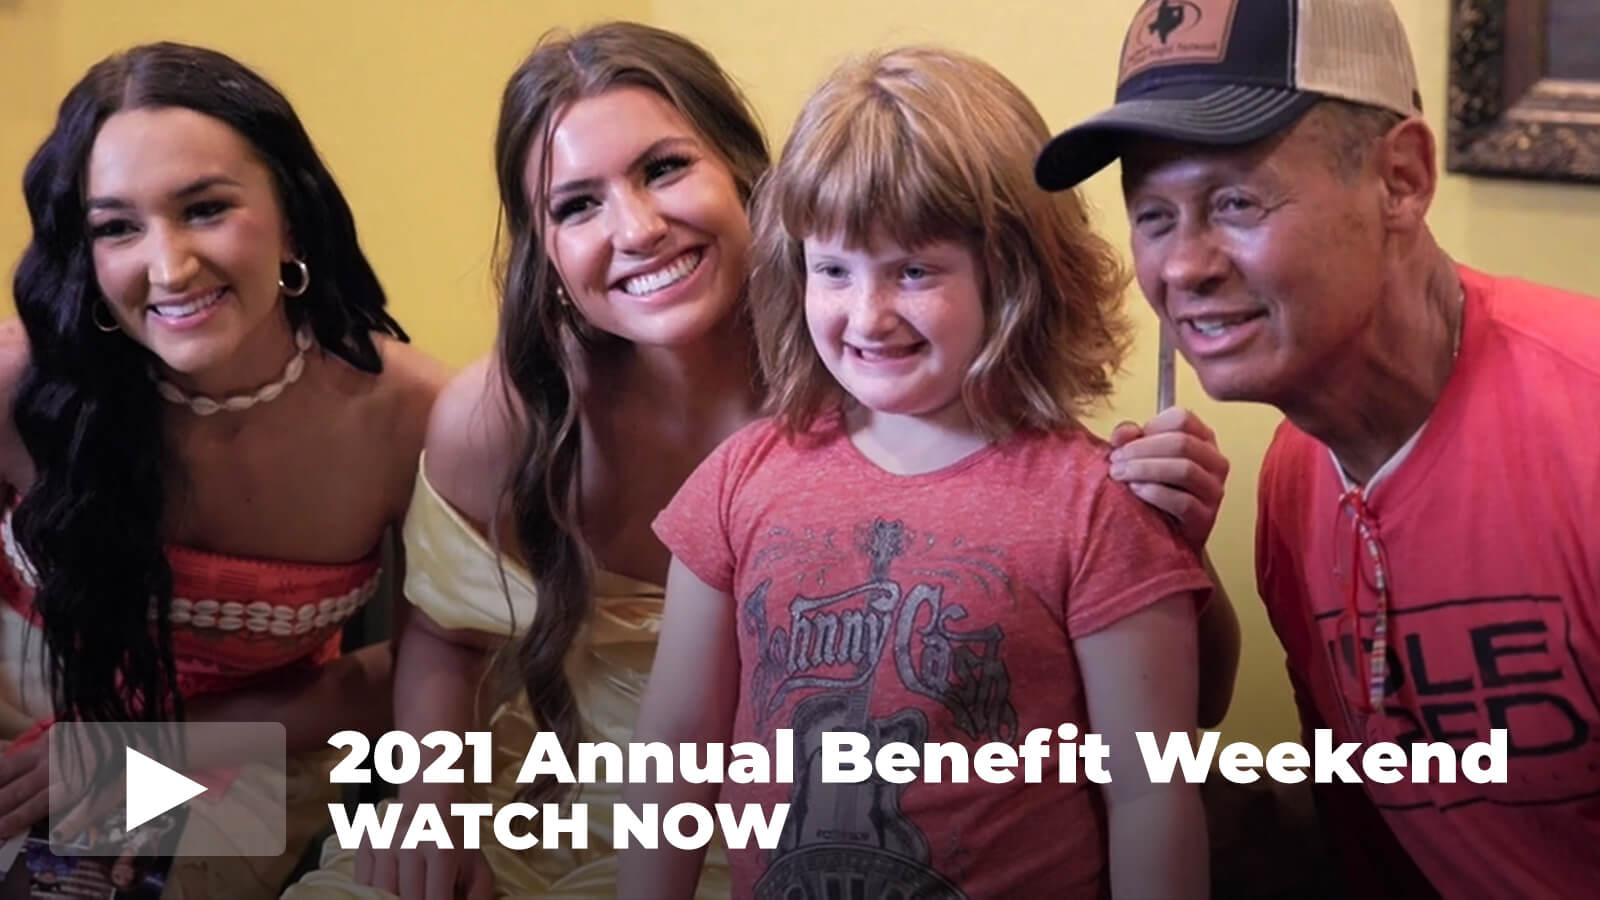 Benefit Weekend 2021 Videos Promo Graphic